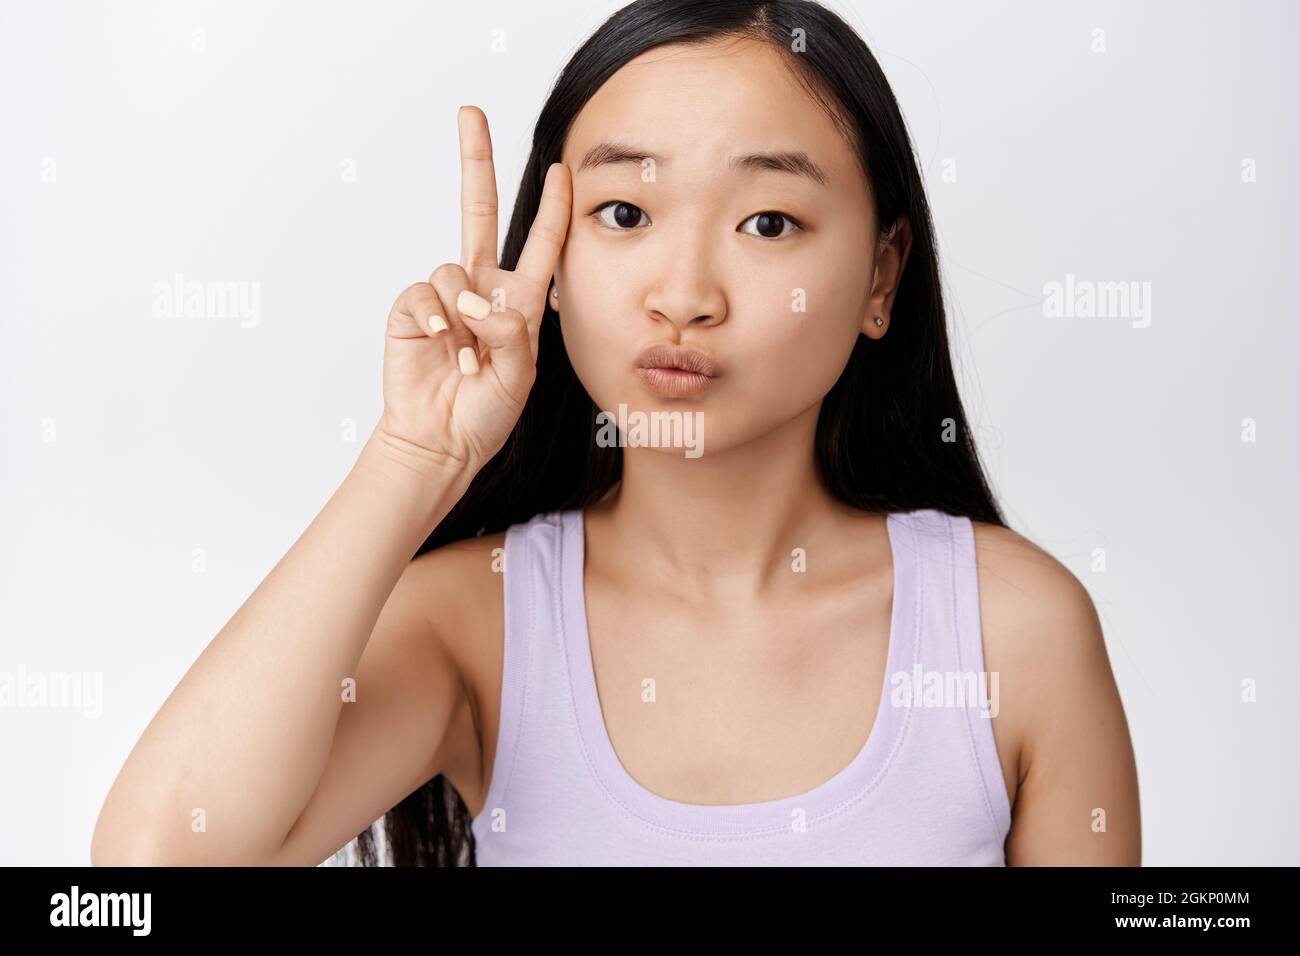 Cute asian woman showing kawaii peace sign near clean face without makeup,  standing over white background Stock Photo - Alamy